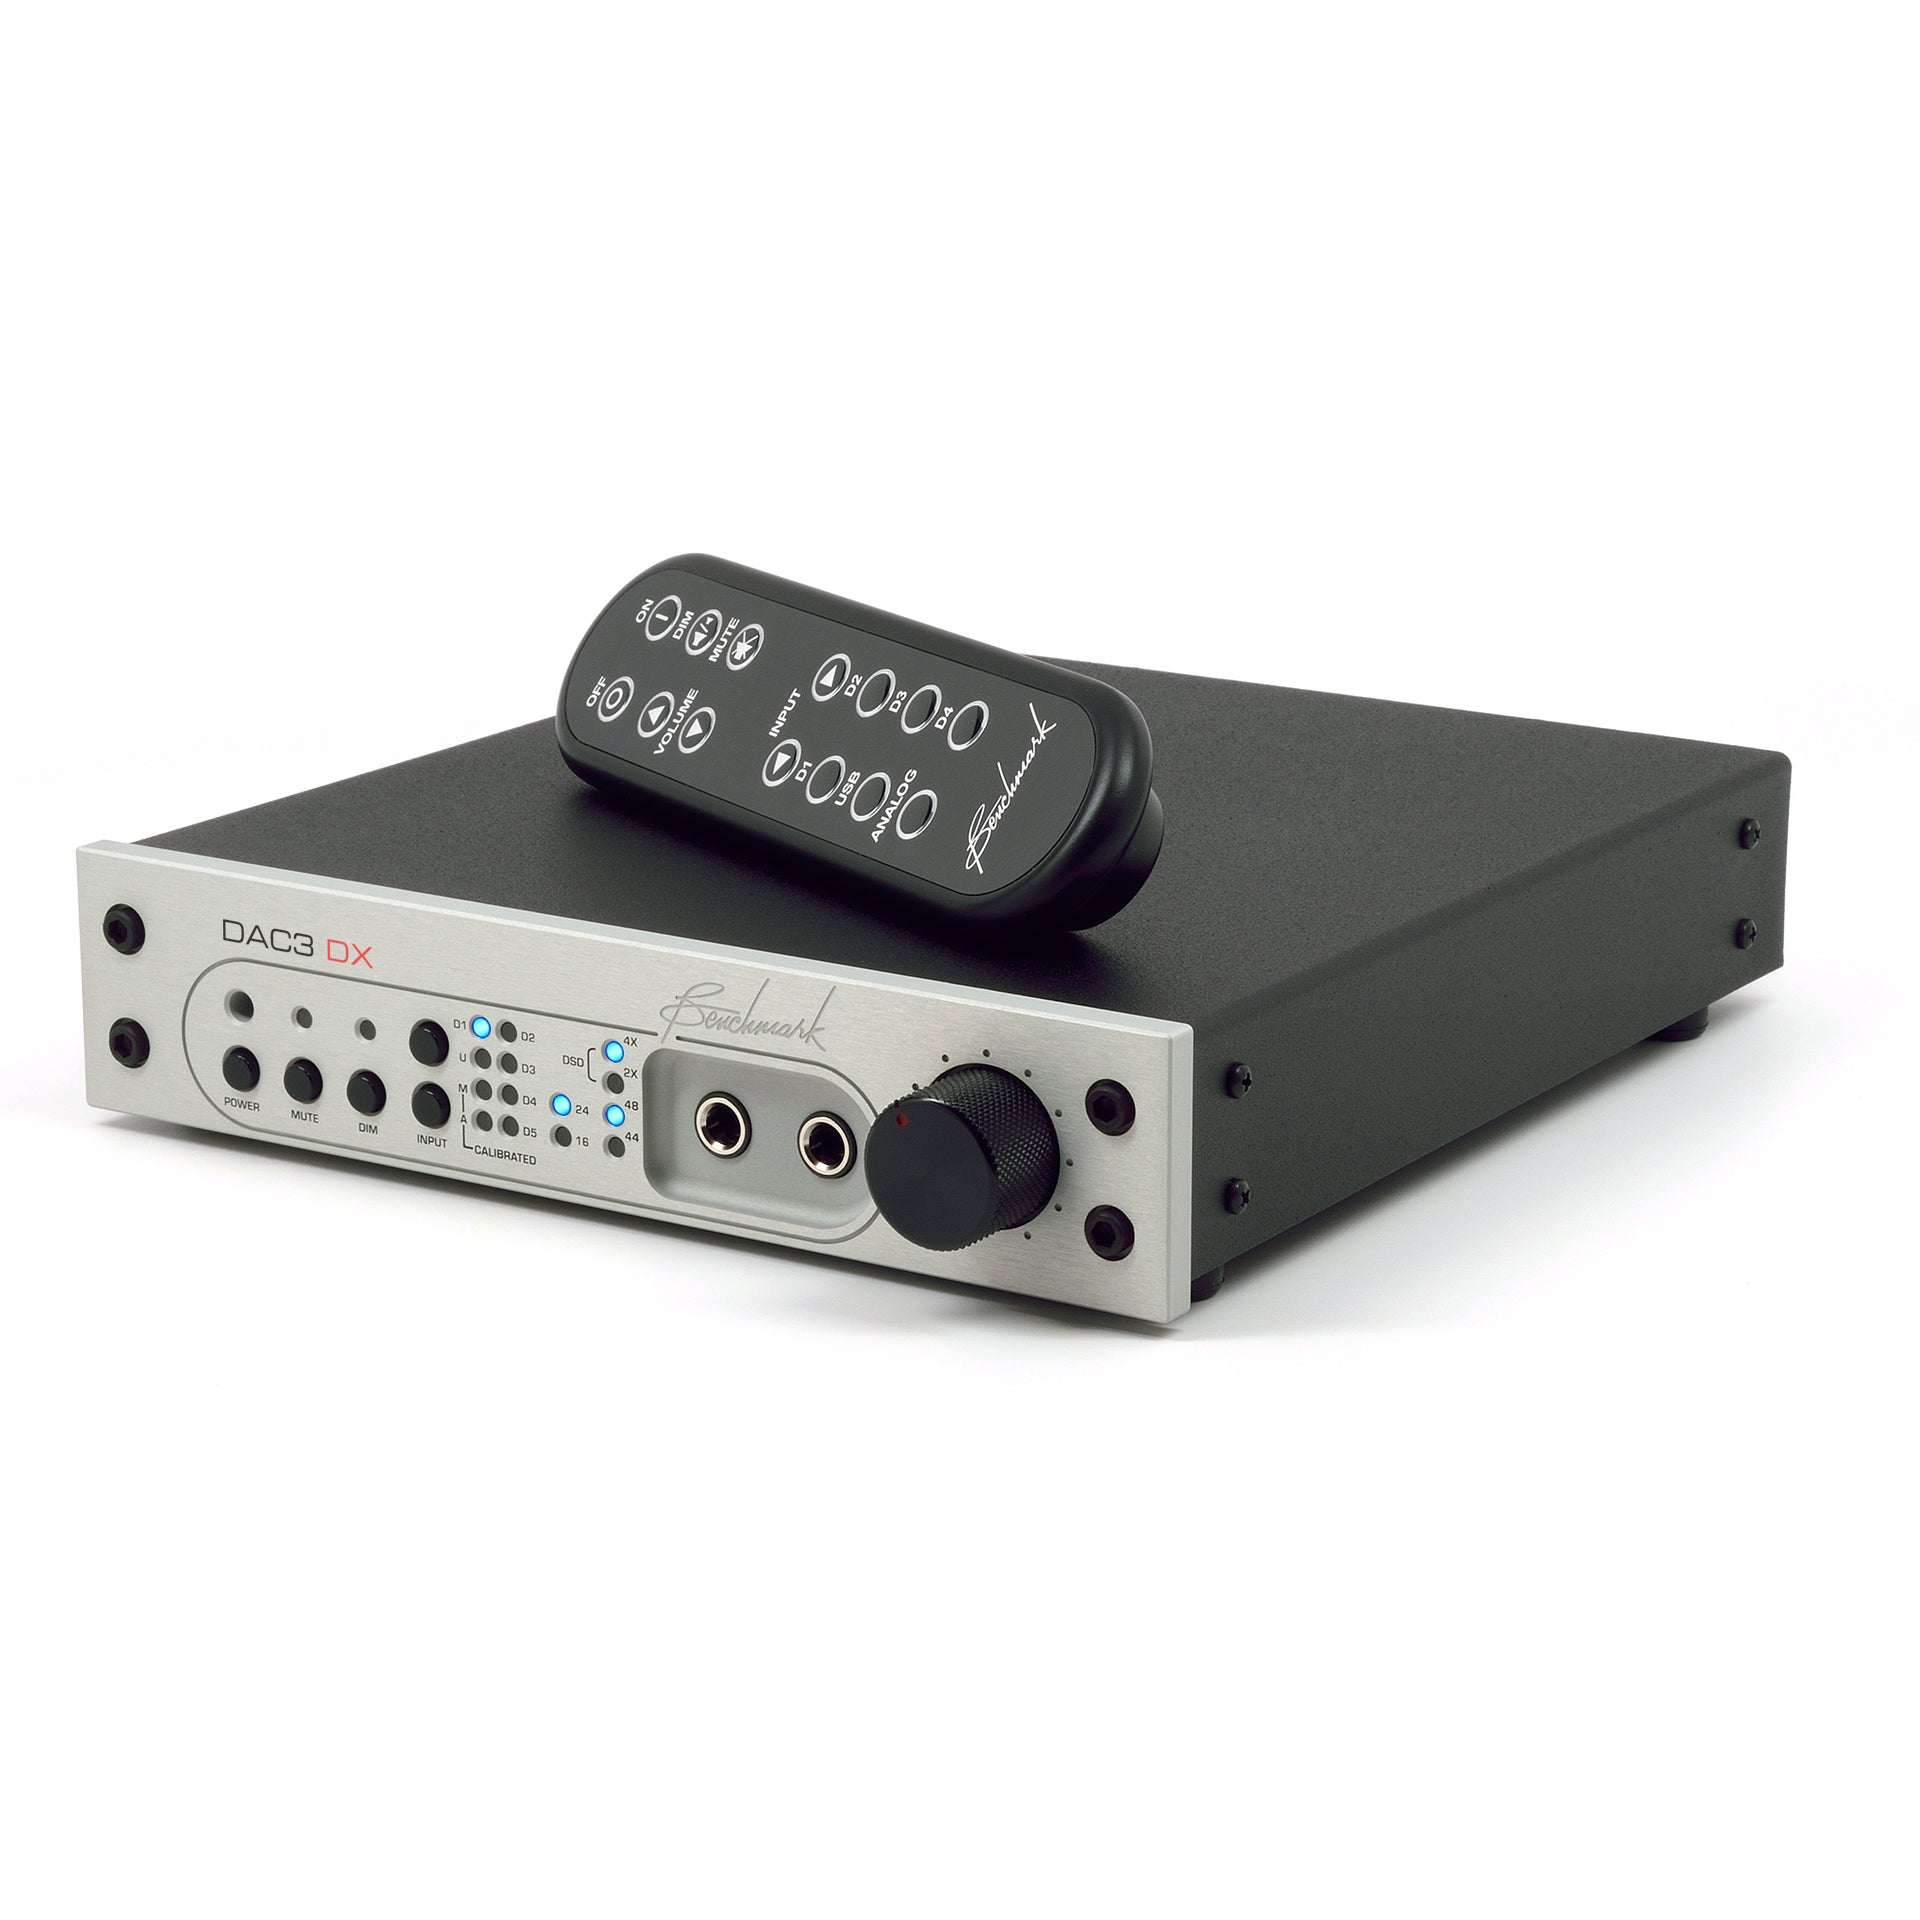 Benchmark DAC3 DX Silver with remote